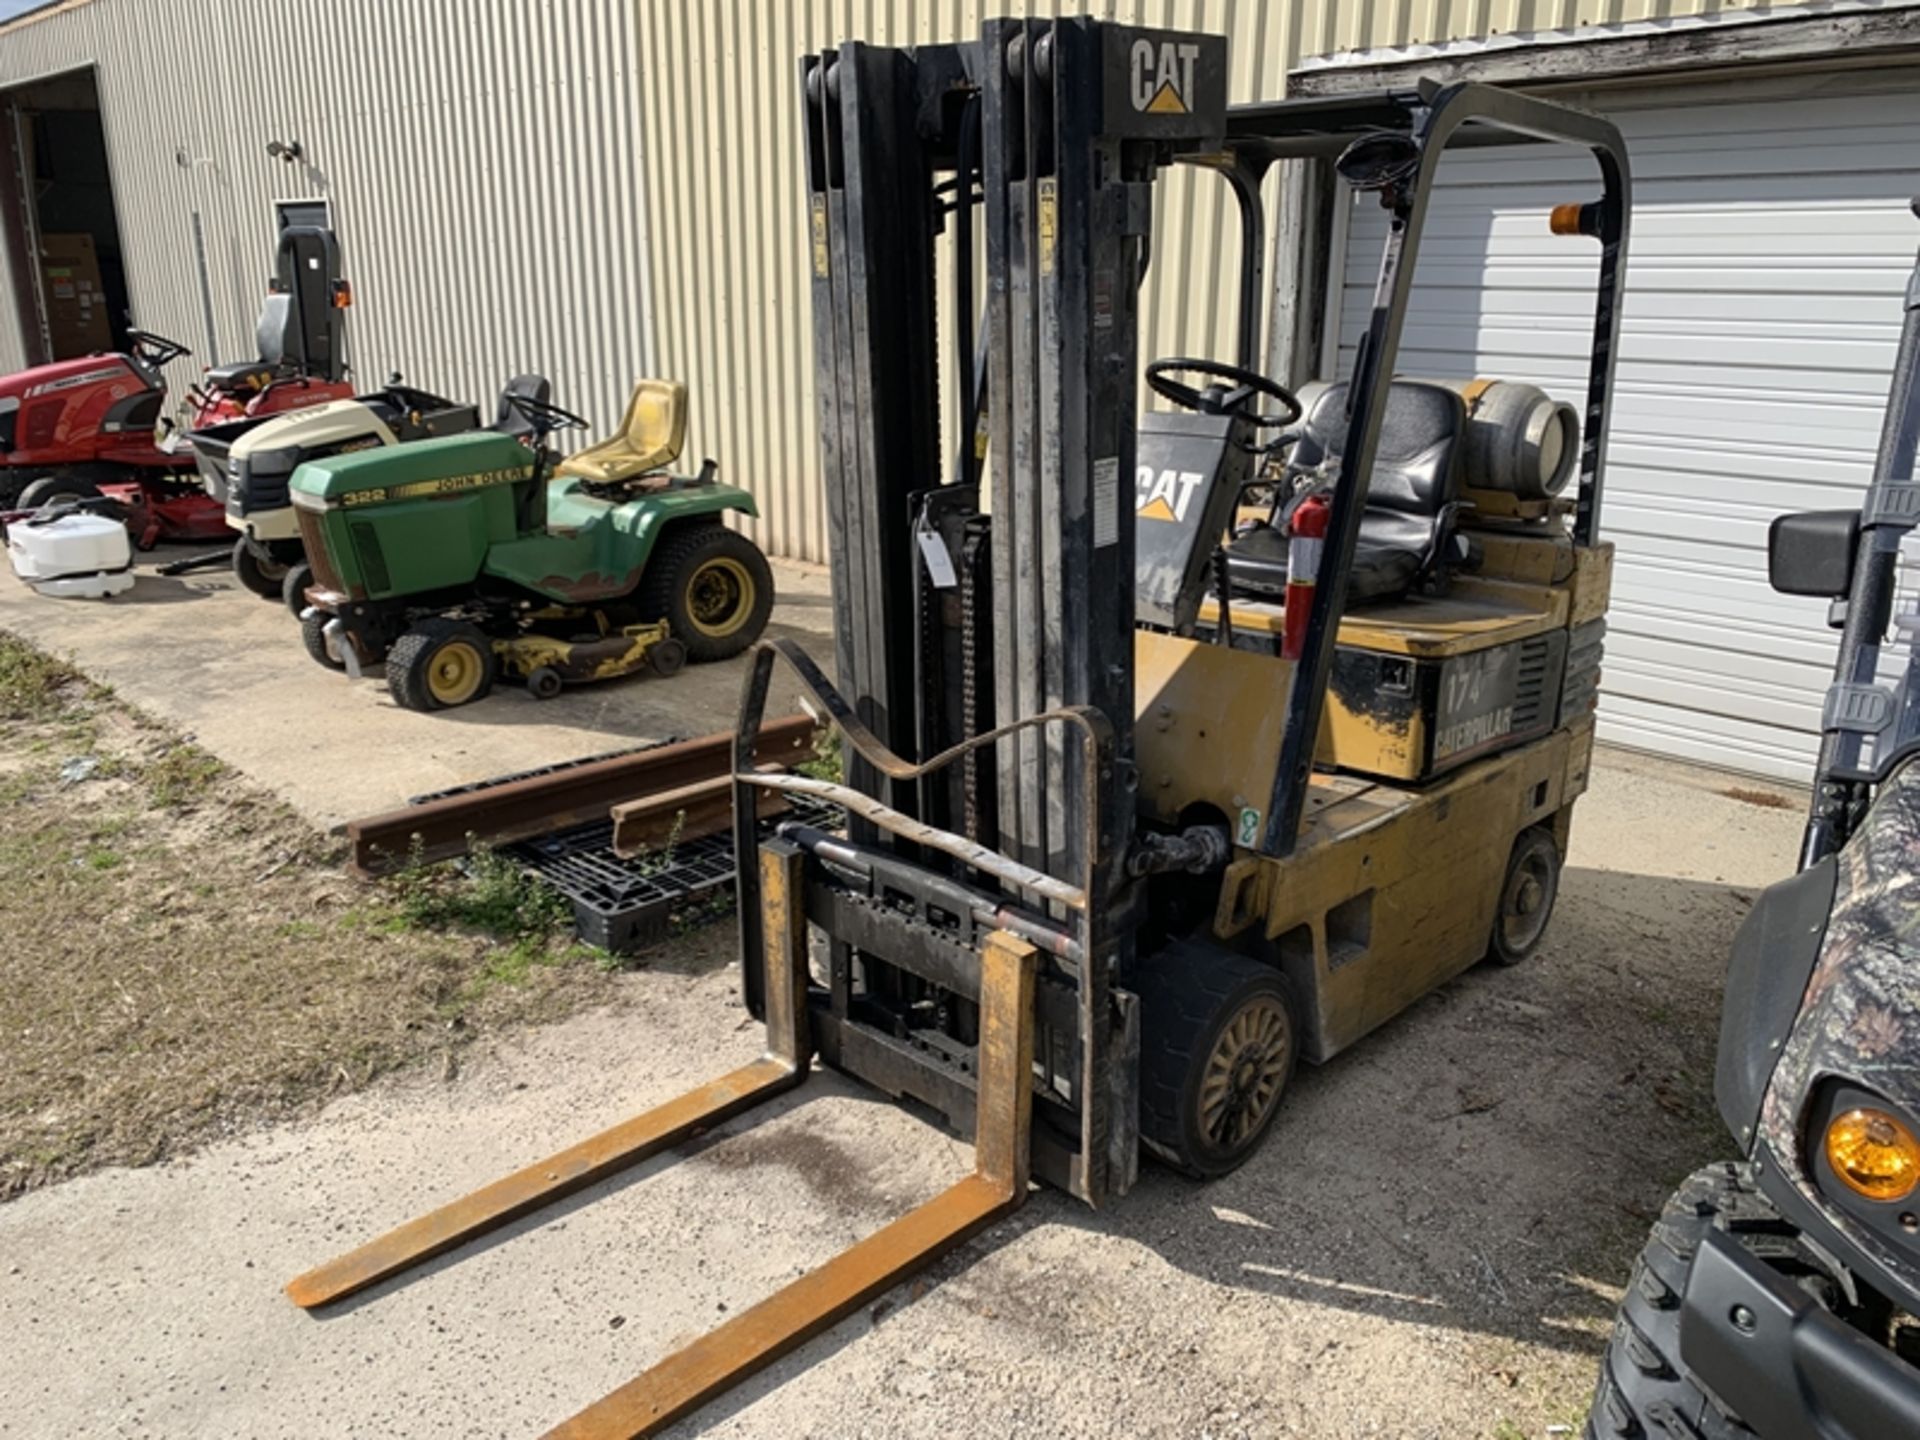 CATERPILLAR forklift, LP gas - ID: 6R-8732 - 9,020 hours showing - Only continues to run when foot